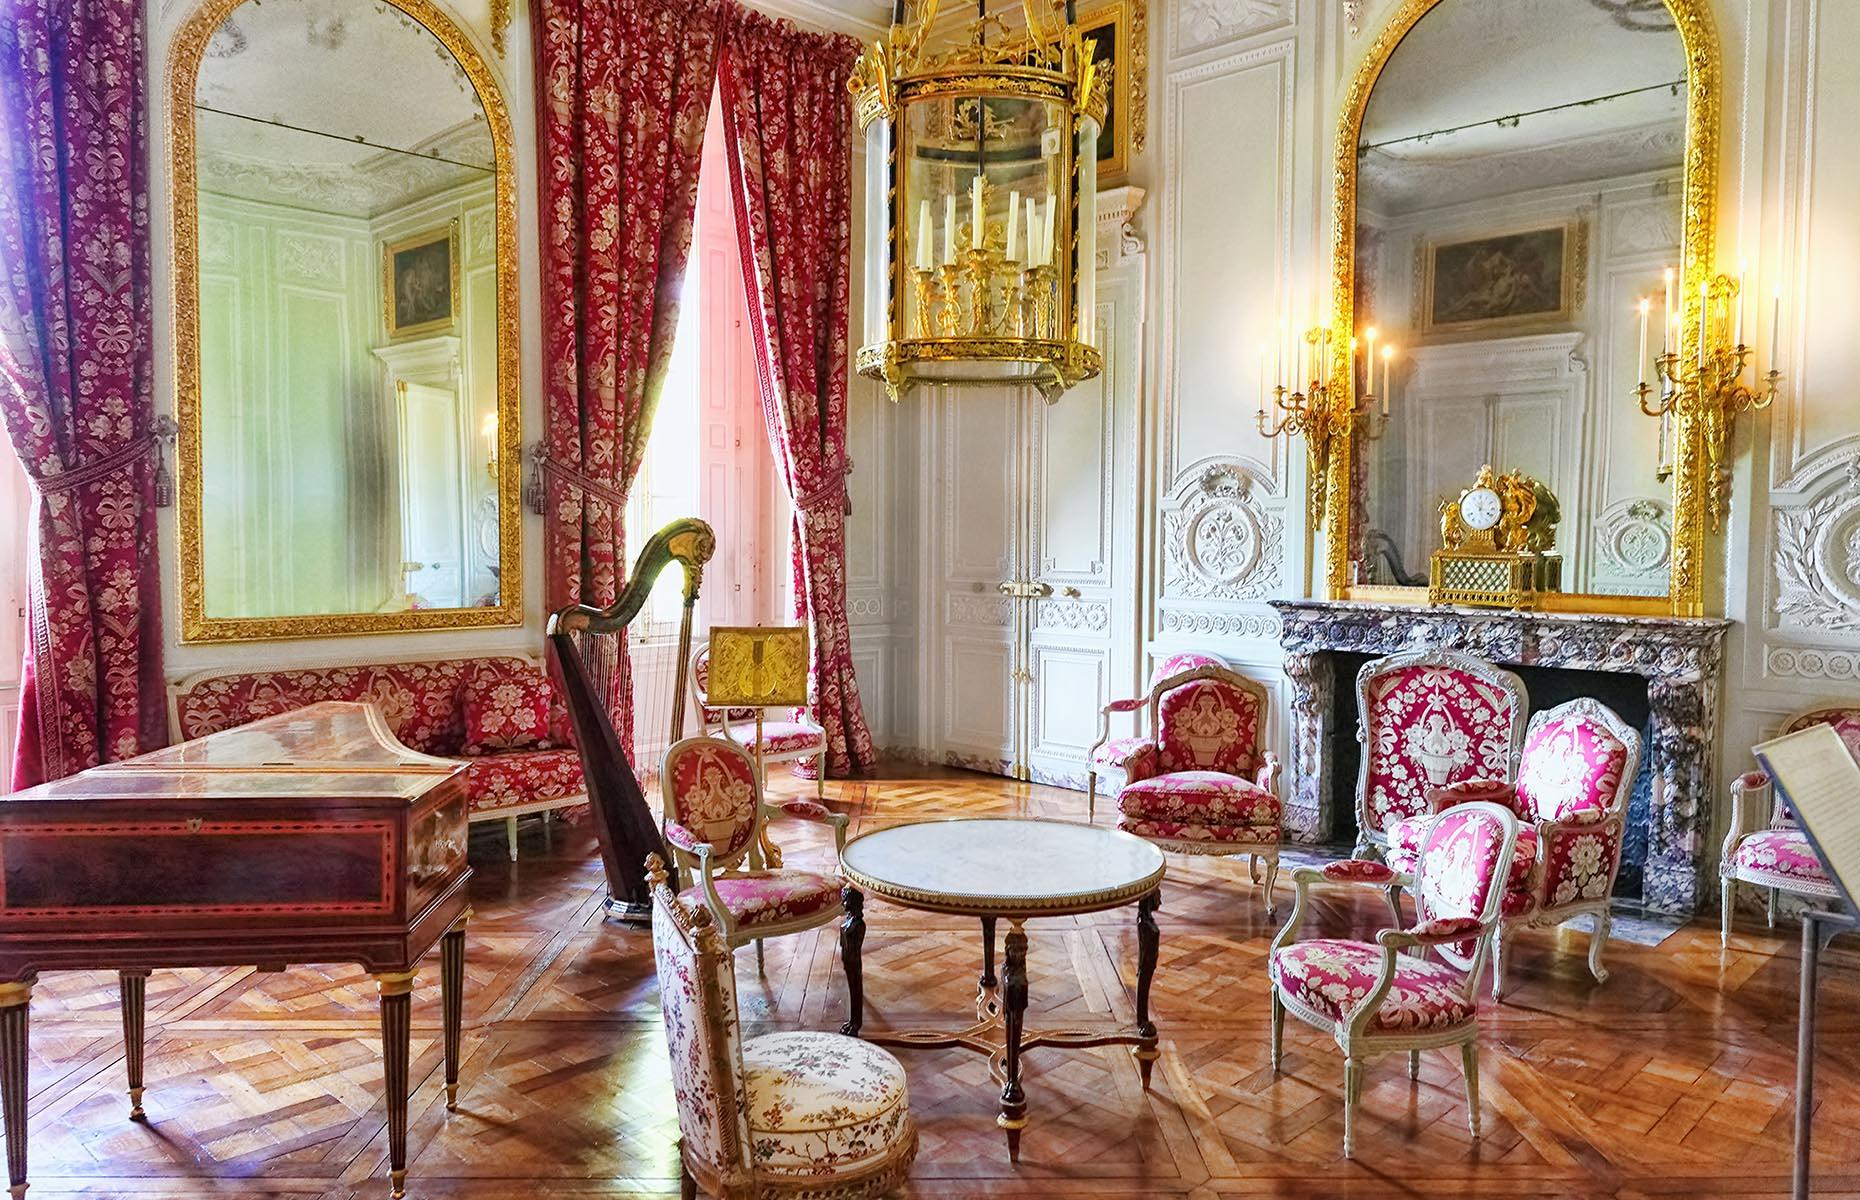 <p>One truly stand-out room within the Petit Trianon is the Boudoir, designed with a soothing baby blue color palette and intricate white carvings adorning the walls.</p>  <p>Meanwhile, the Salon (pictured), where Marie Antoinette entertained her guests, boasted a regal color scheme of pale green and white, with pops of fuchsia, plush floral furnishings, and gold accents.</p>